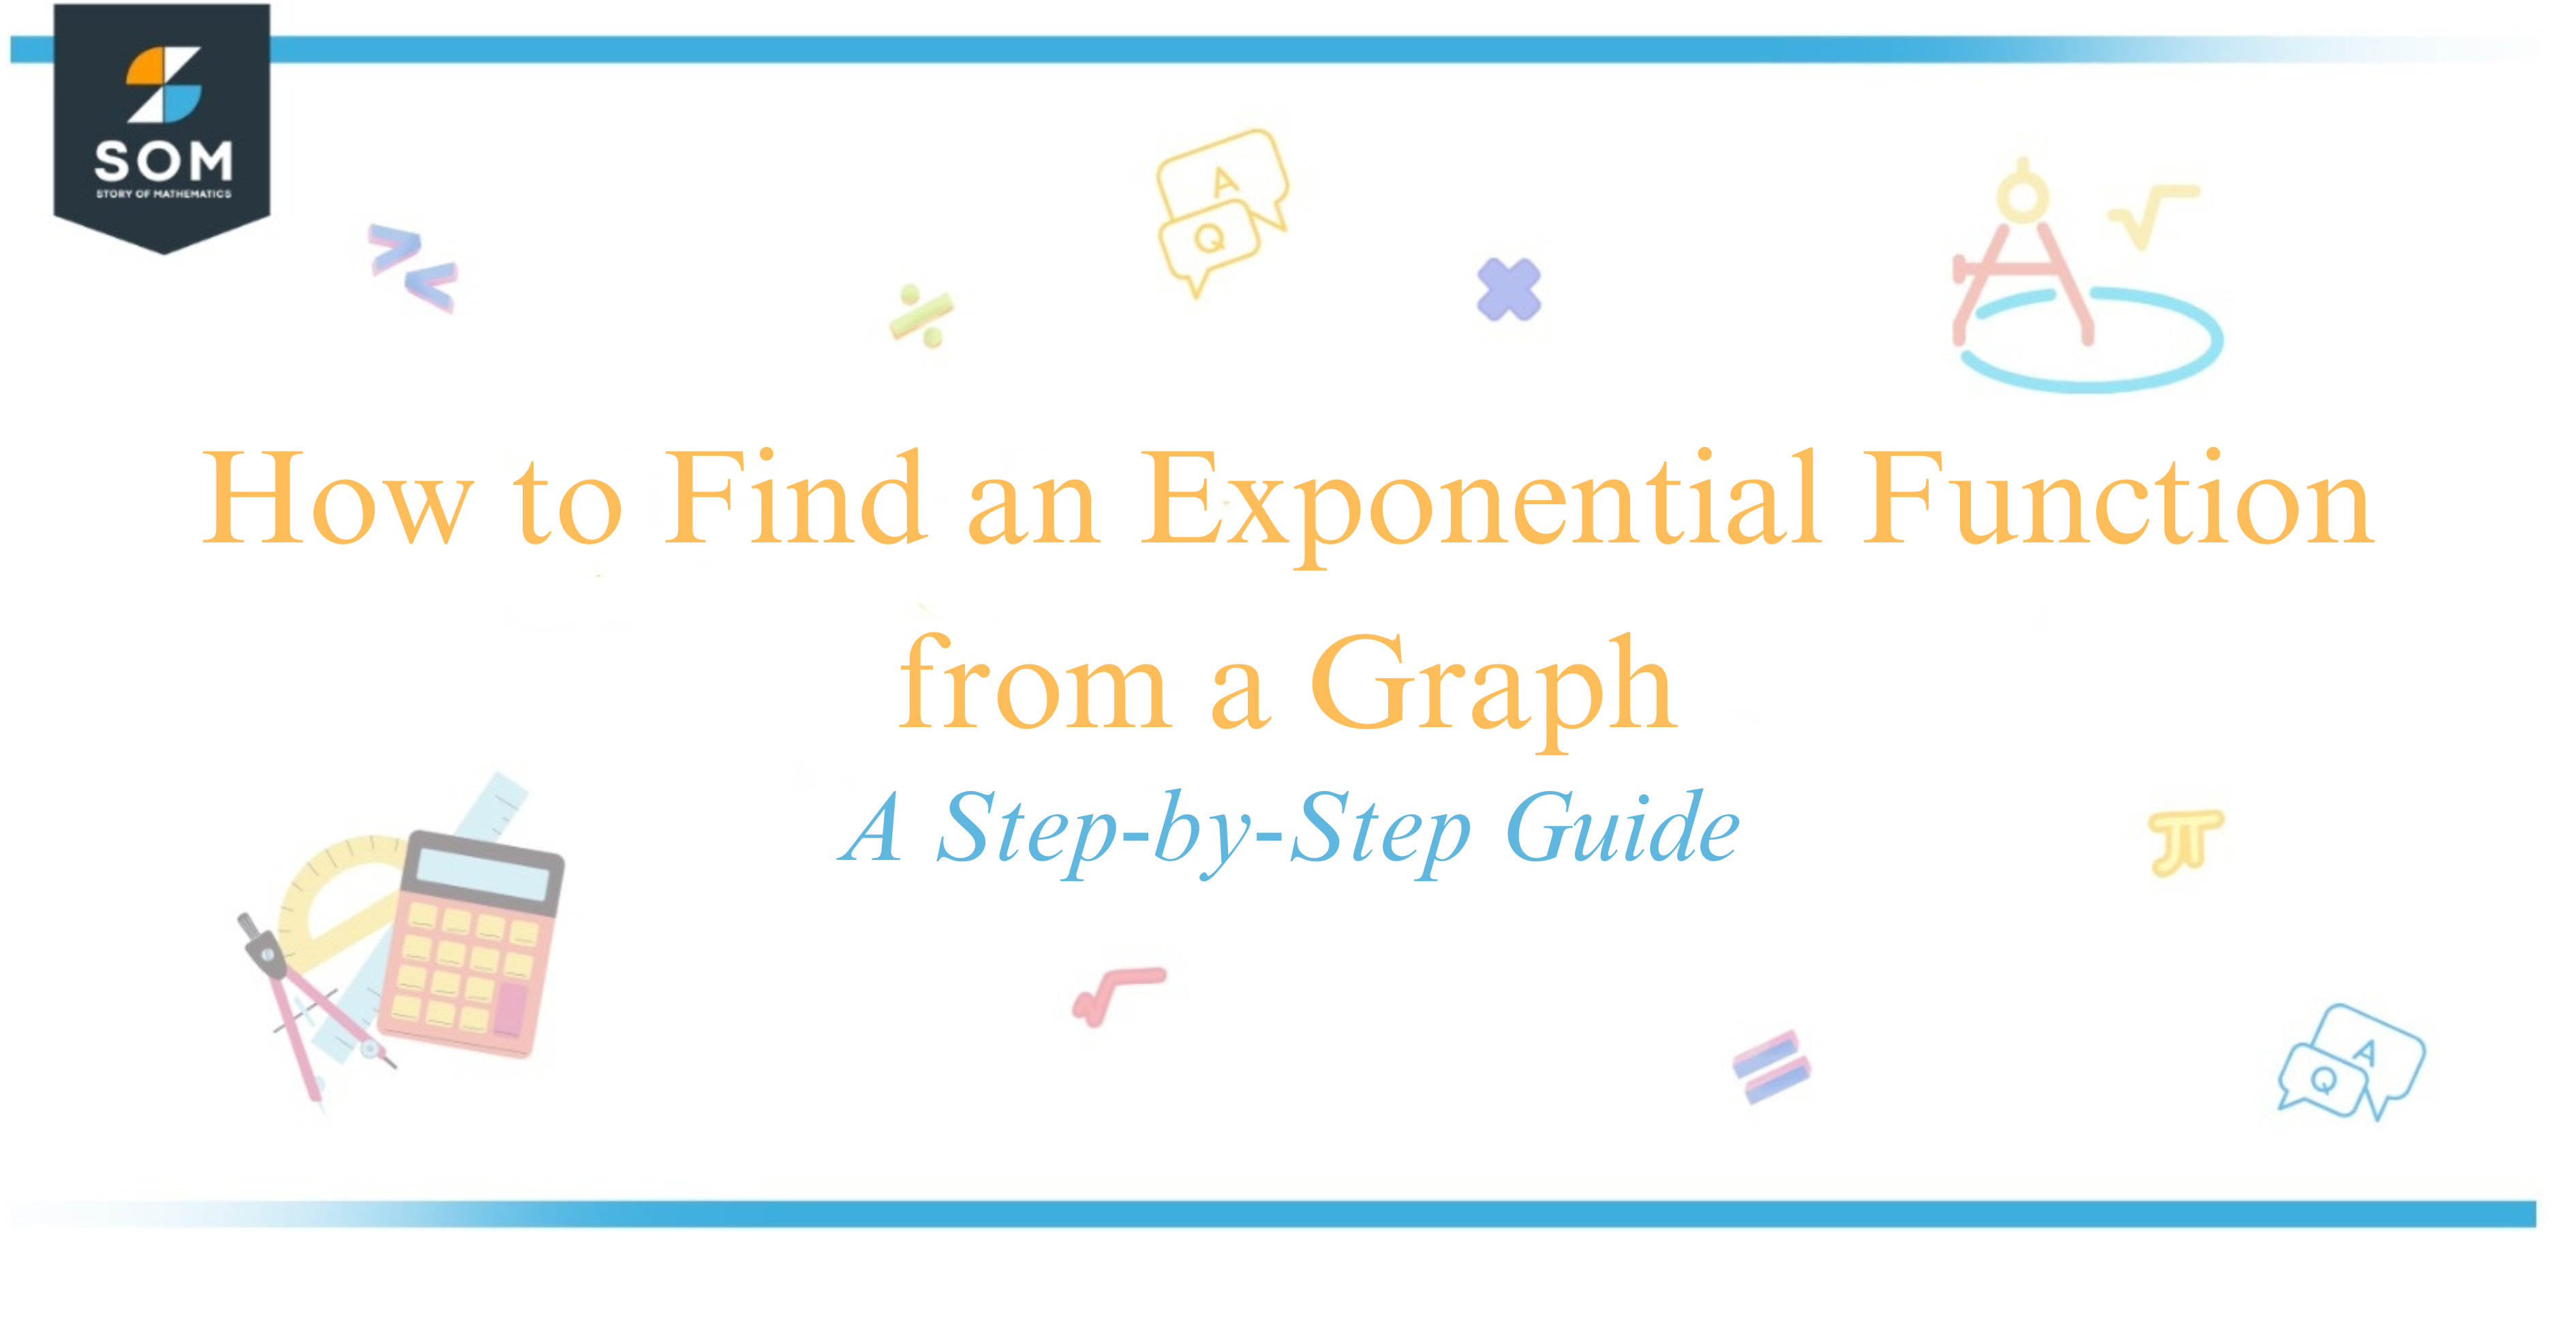 How to Find an Exponential Function from a Graph A Step-by-Step Guide